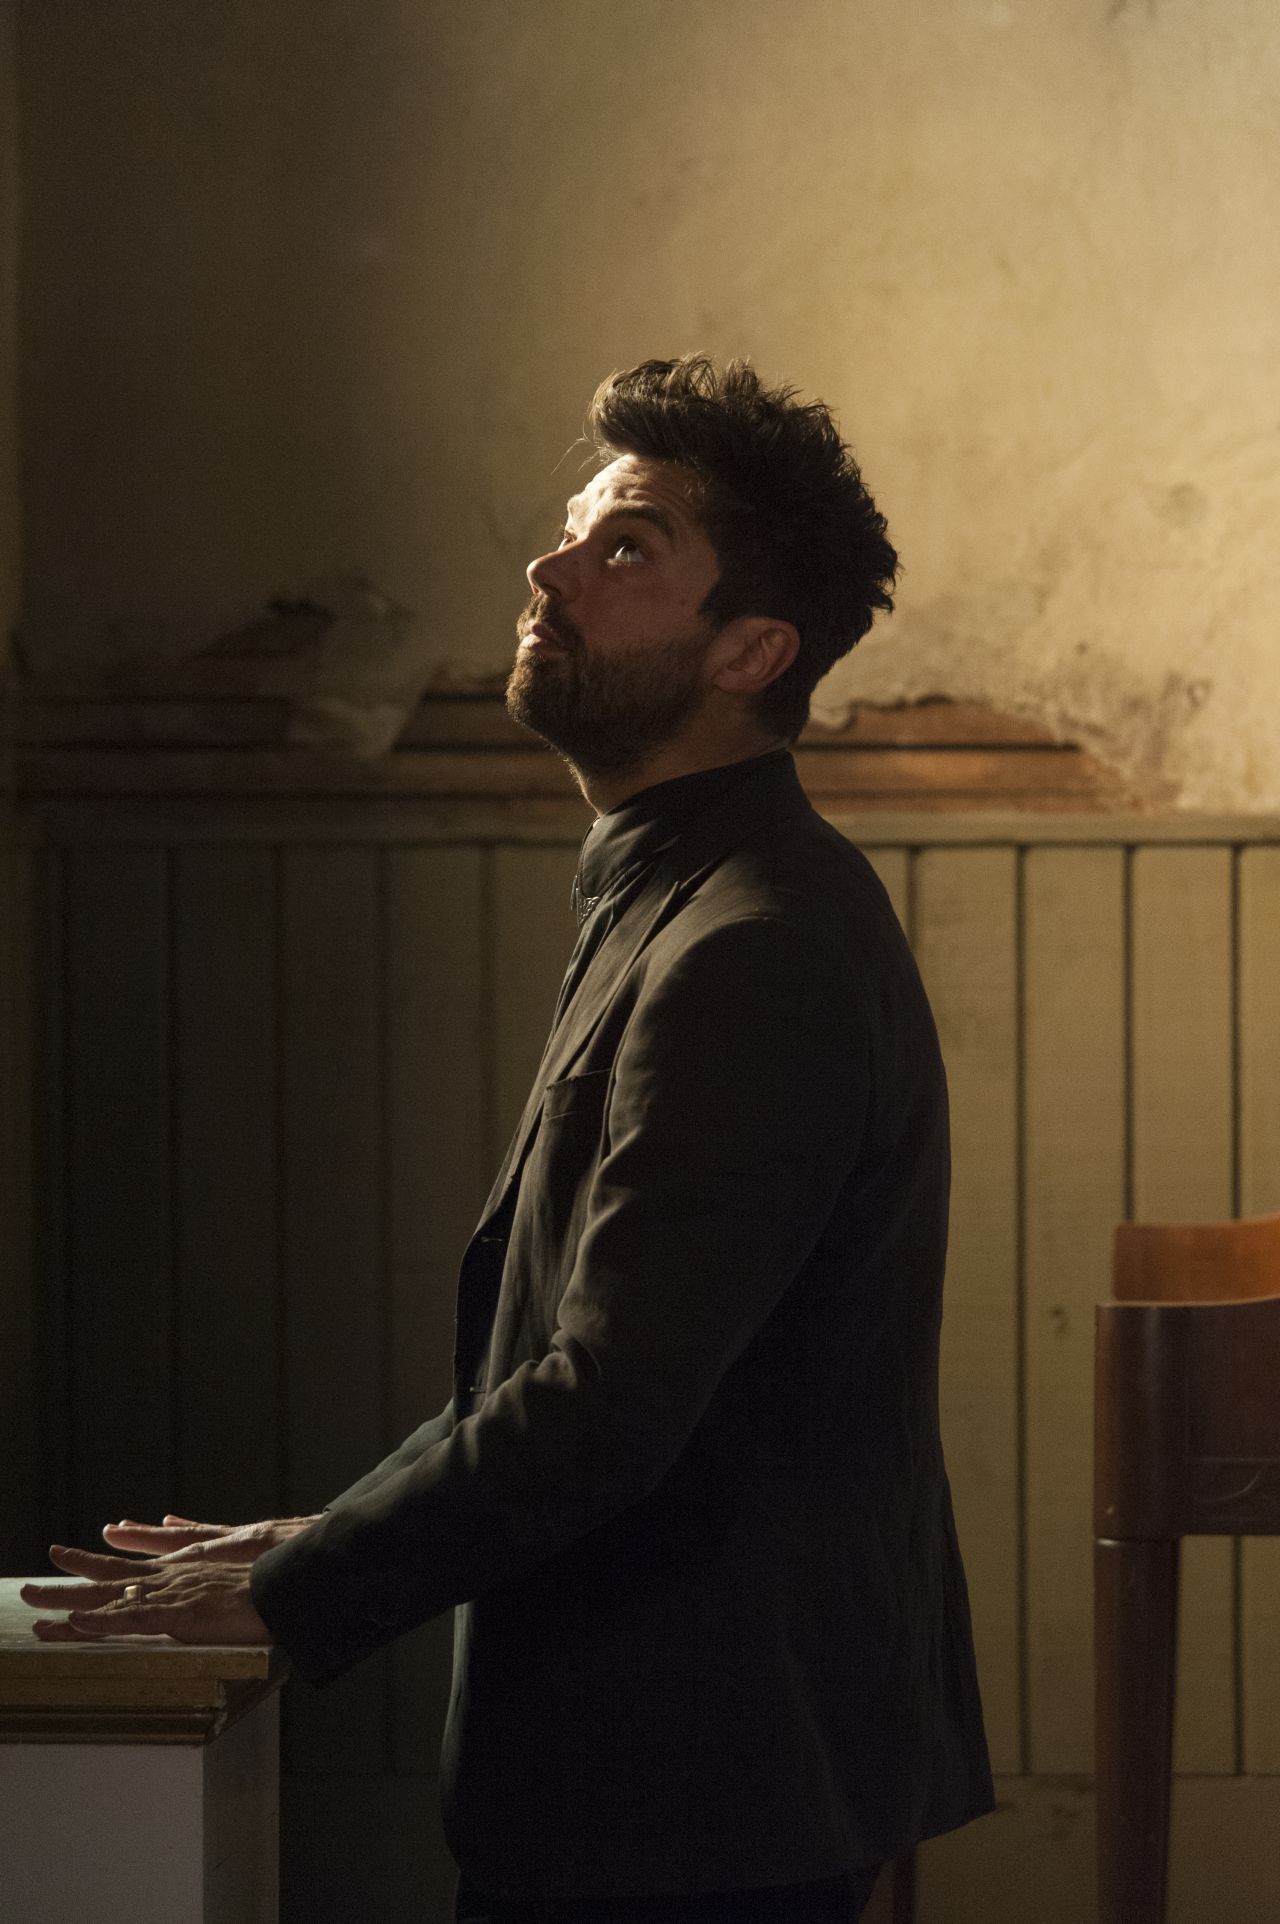 Dominic Cooper as Jesse CusterÂ - Preacher _ Season 1, Episode 7 - Photo Credit: Lewis Jacobs/Sony Pictures Television/AMC